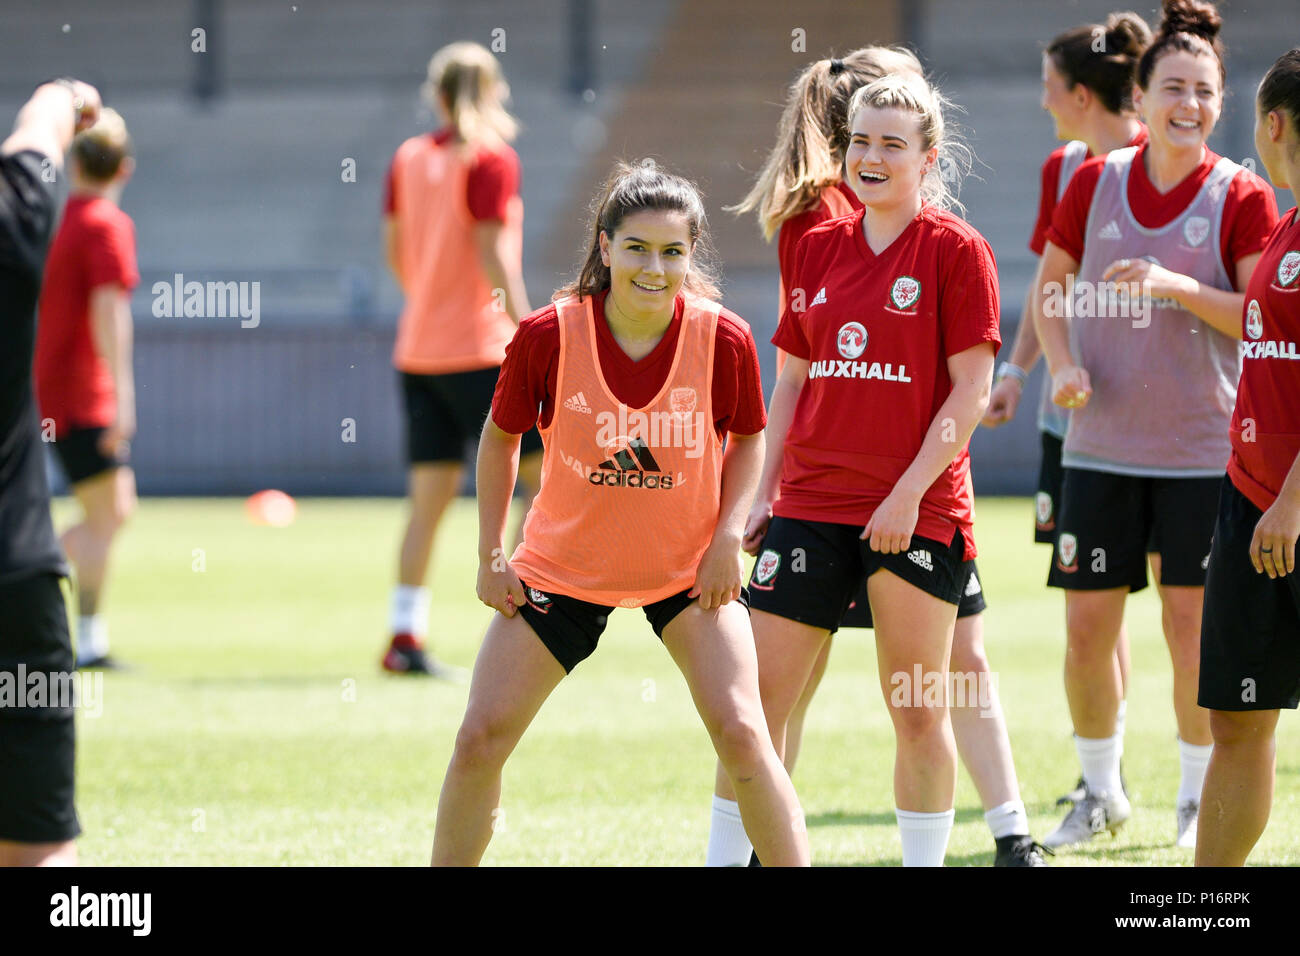 Newport, Wales, UK. 11th June, 2018. Wales Womens International Team Training, Newport City Stadium, Newport, 11/6/18: Wales team train ahead of their crucial world cup qualifier against Russia Credit: Andrew Dowling/Influential Photography/Alamy Live News Stock Photo